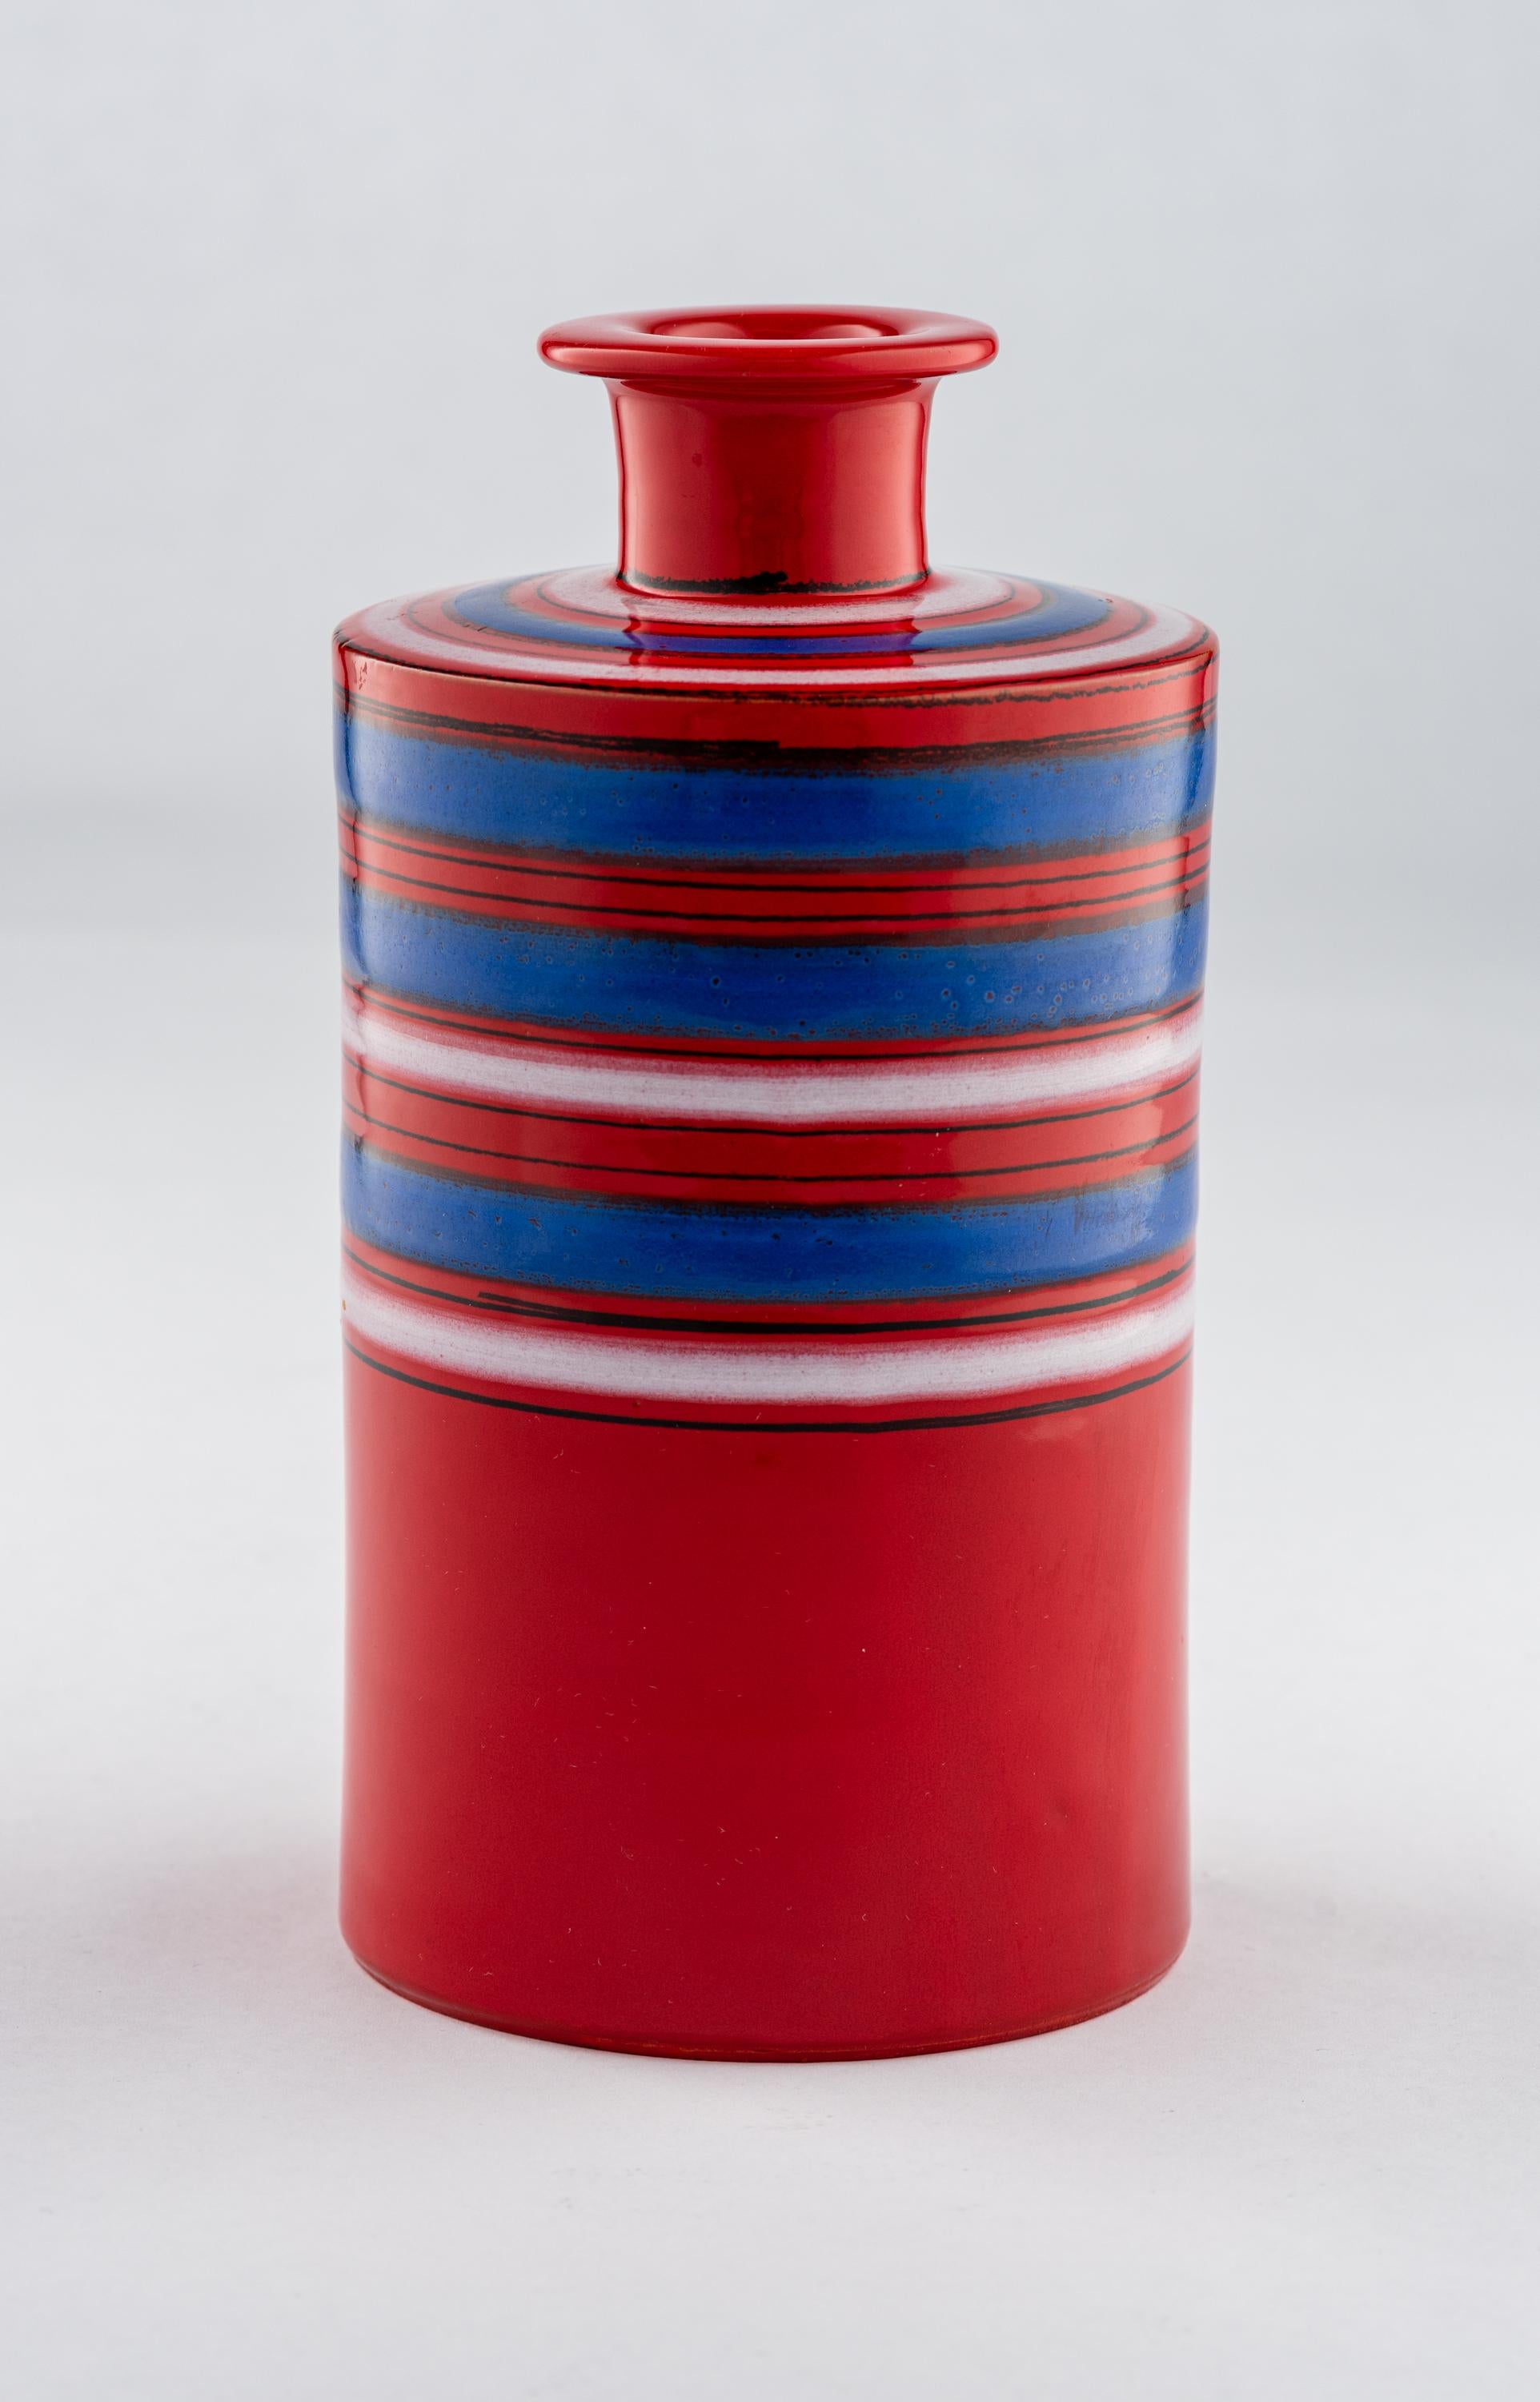 Bitossi Raymor vase, ceramic, stripes, red, blue, white, signed. Small scale cylinder vase with modernist form and decorated with red, blue, and white stripes. Signed with Raymor label which reads: 555 BIT. Retains original import label: 